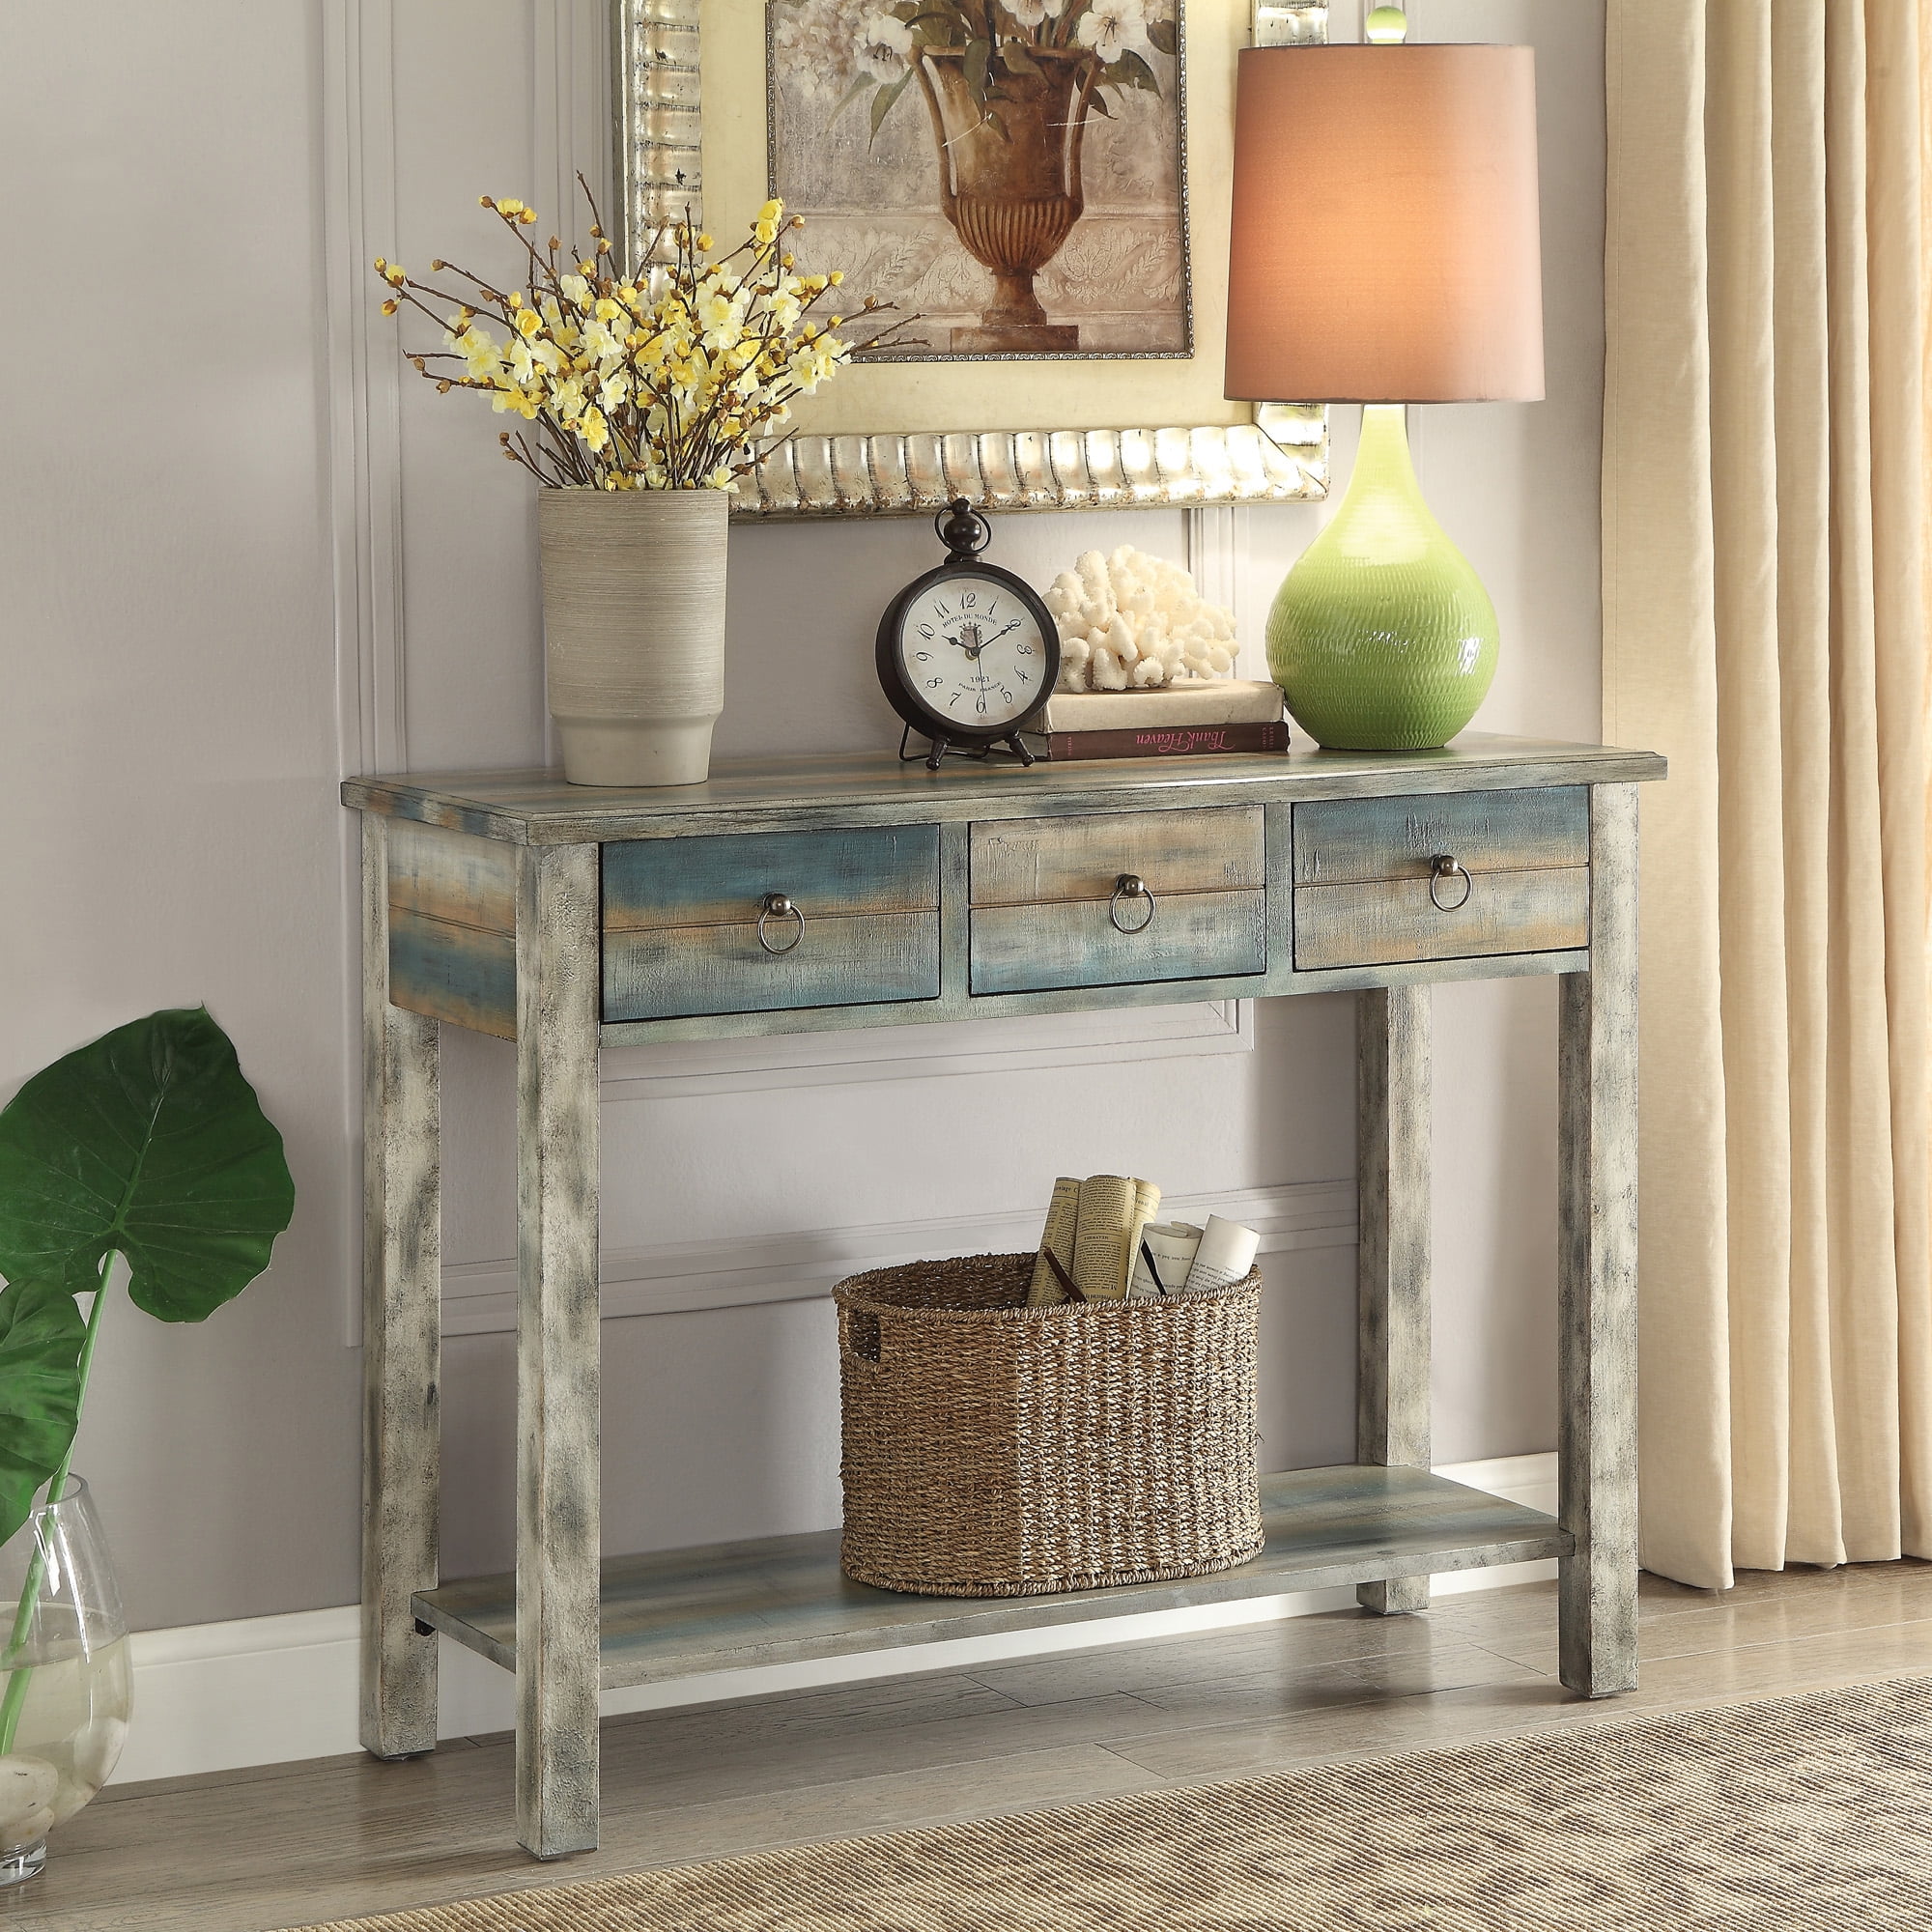 Picture of ACME 97257 Glancio Console Table - Antique White & Teal - 32 x 42 x 16 in.